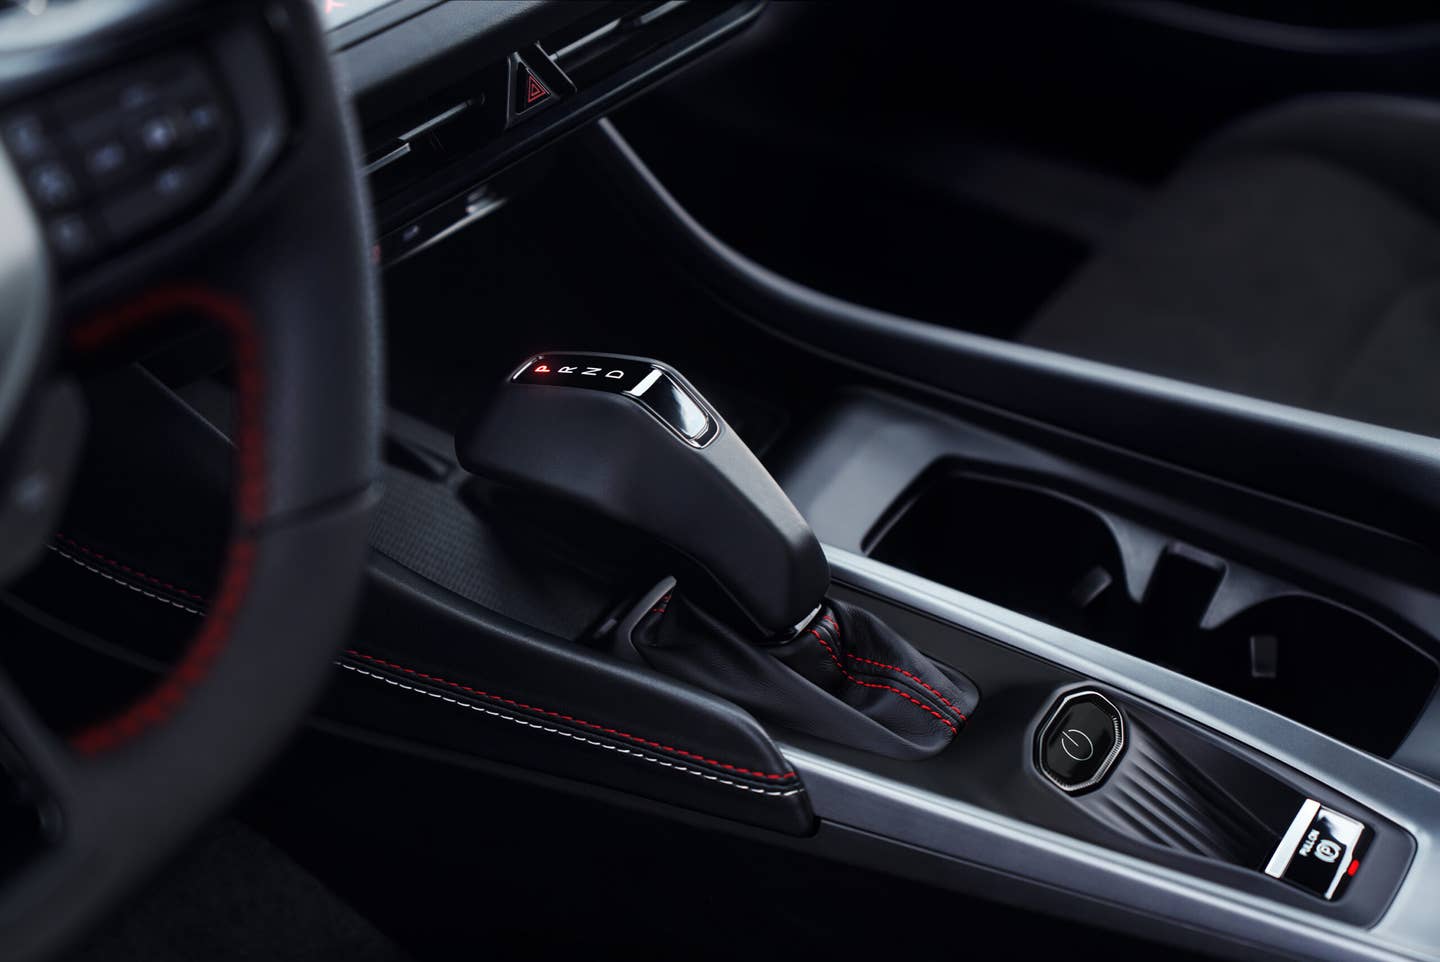 An all-new, modern "pistol-grip" shifter and the start/power button are packaged close together on the center console of the all-new Dodge Charger, which also incorporates a wireless phone charger.